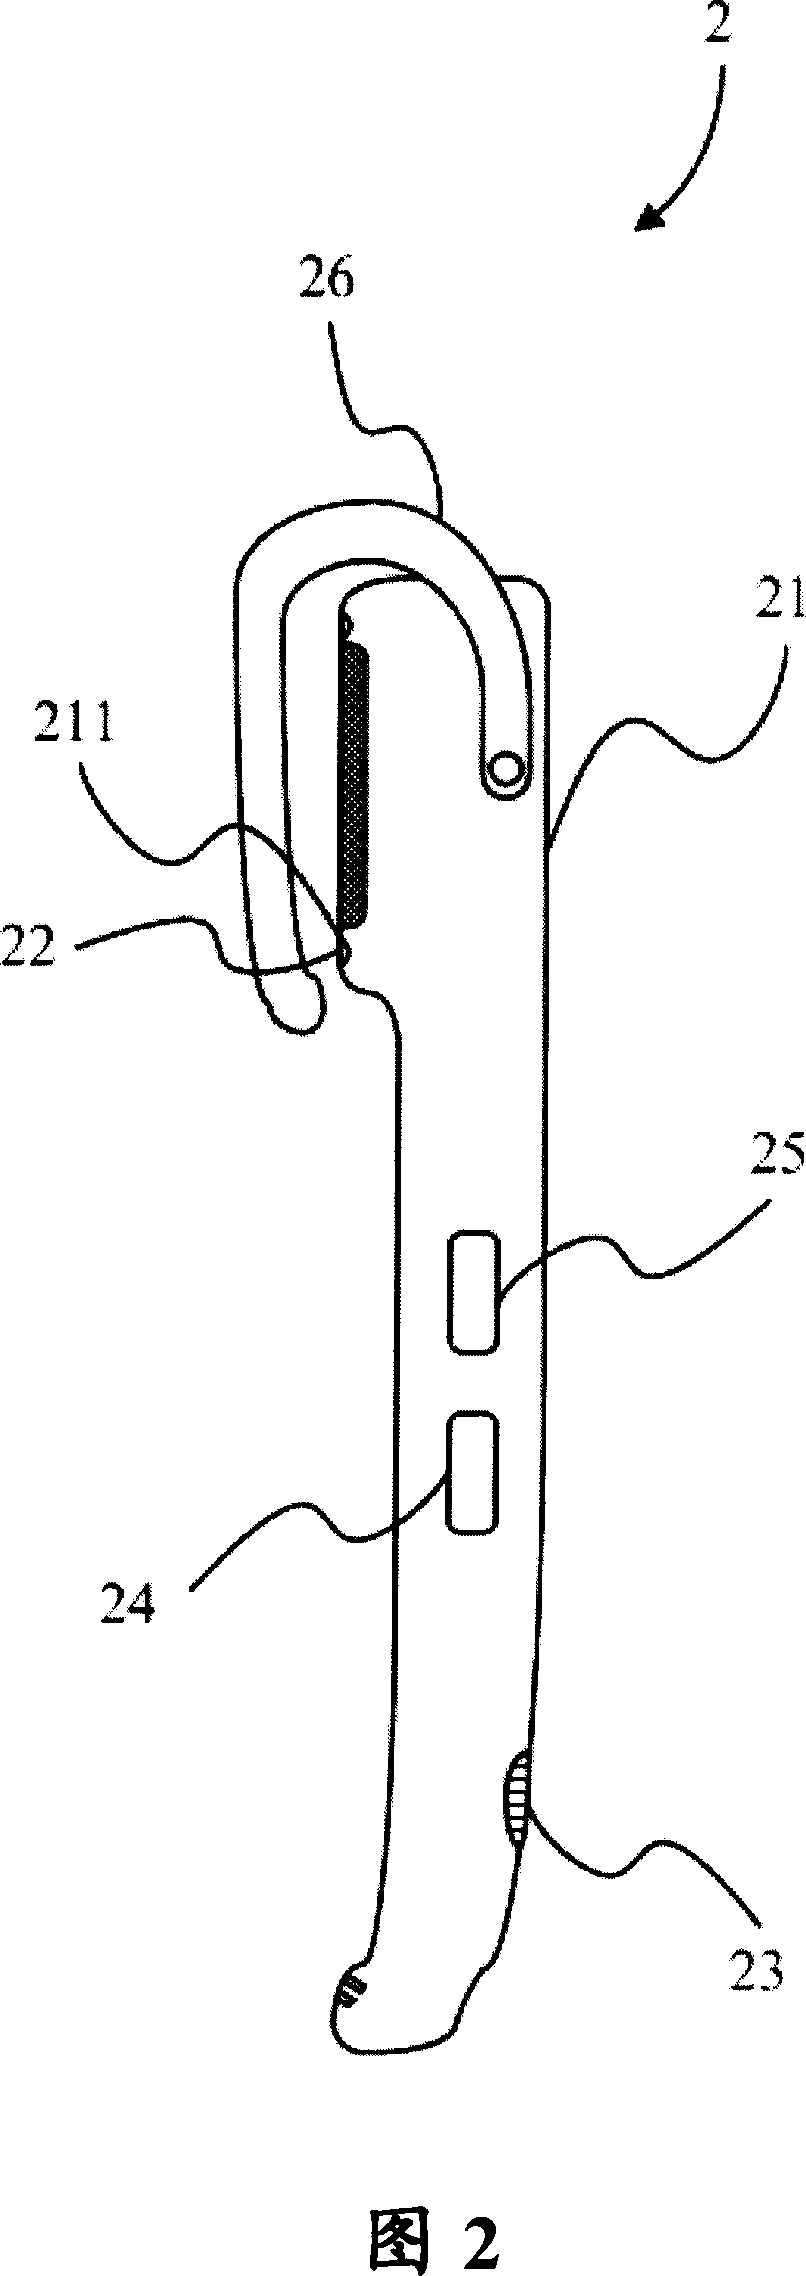 Earphone device capable of communicating with mobile communication equipment